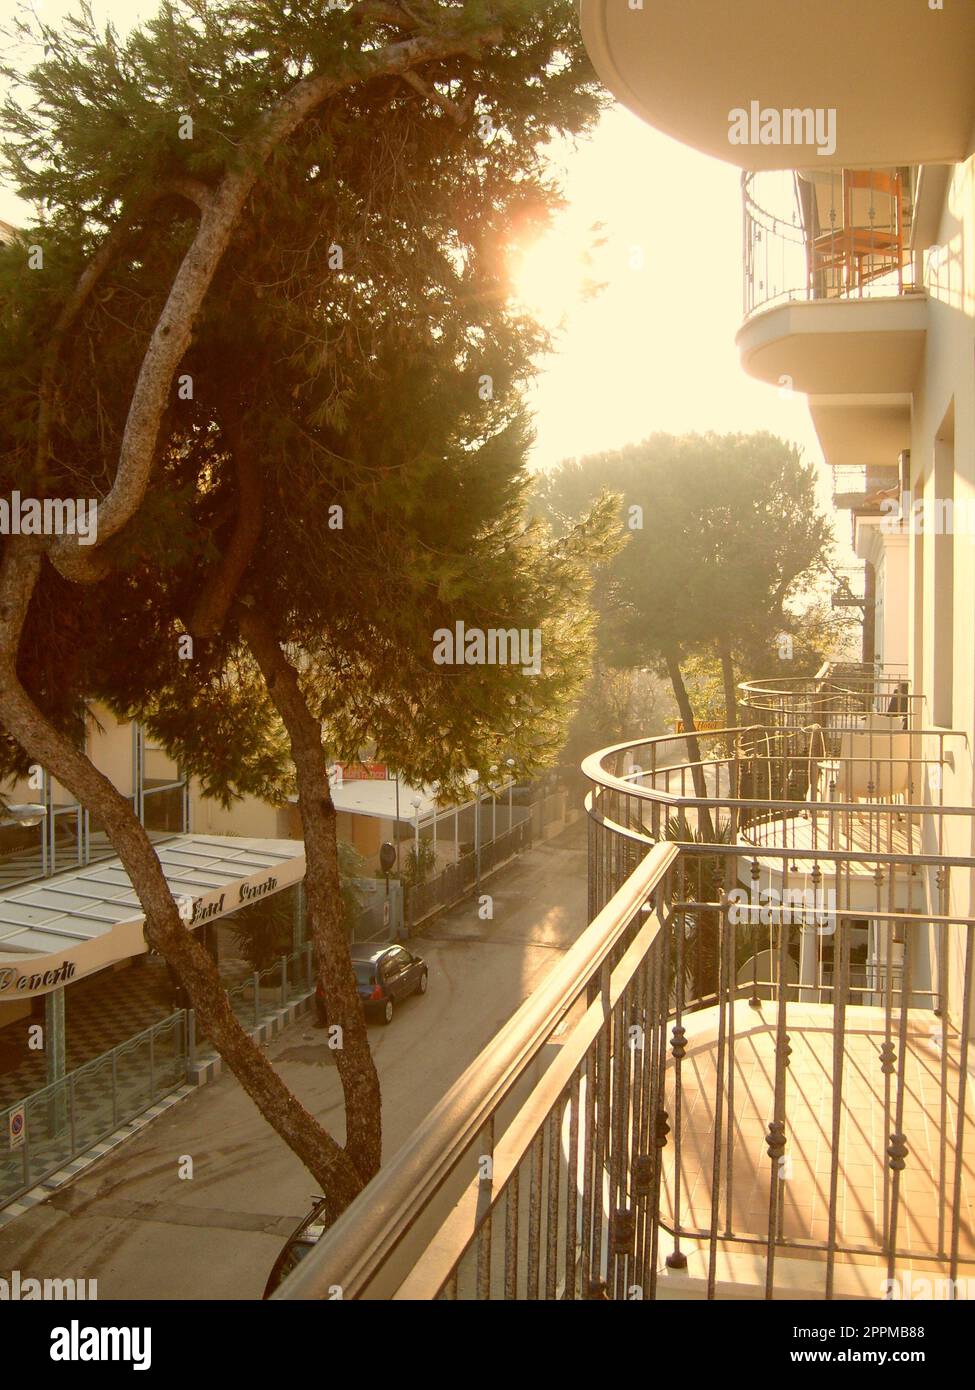 Rimini, Italy, December 10, 2019 Sunny winter morning on the balcony of a hotel in Italy. Several terraces with a metal fence above a narrow Italian street with a pine tree, bathed in yellow sun Stock Photo